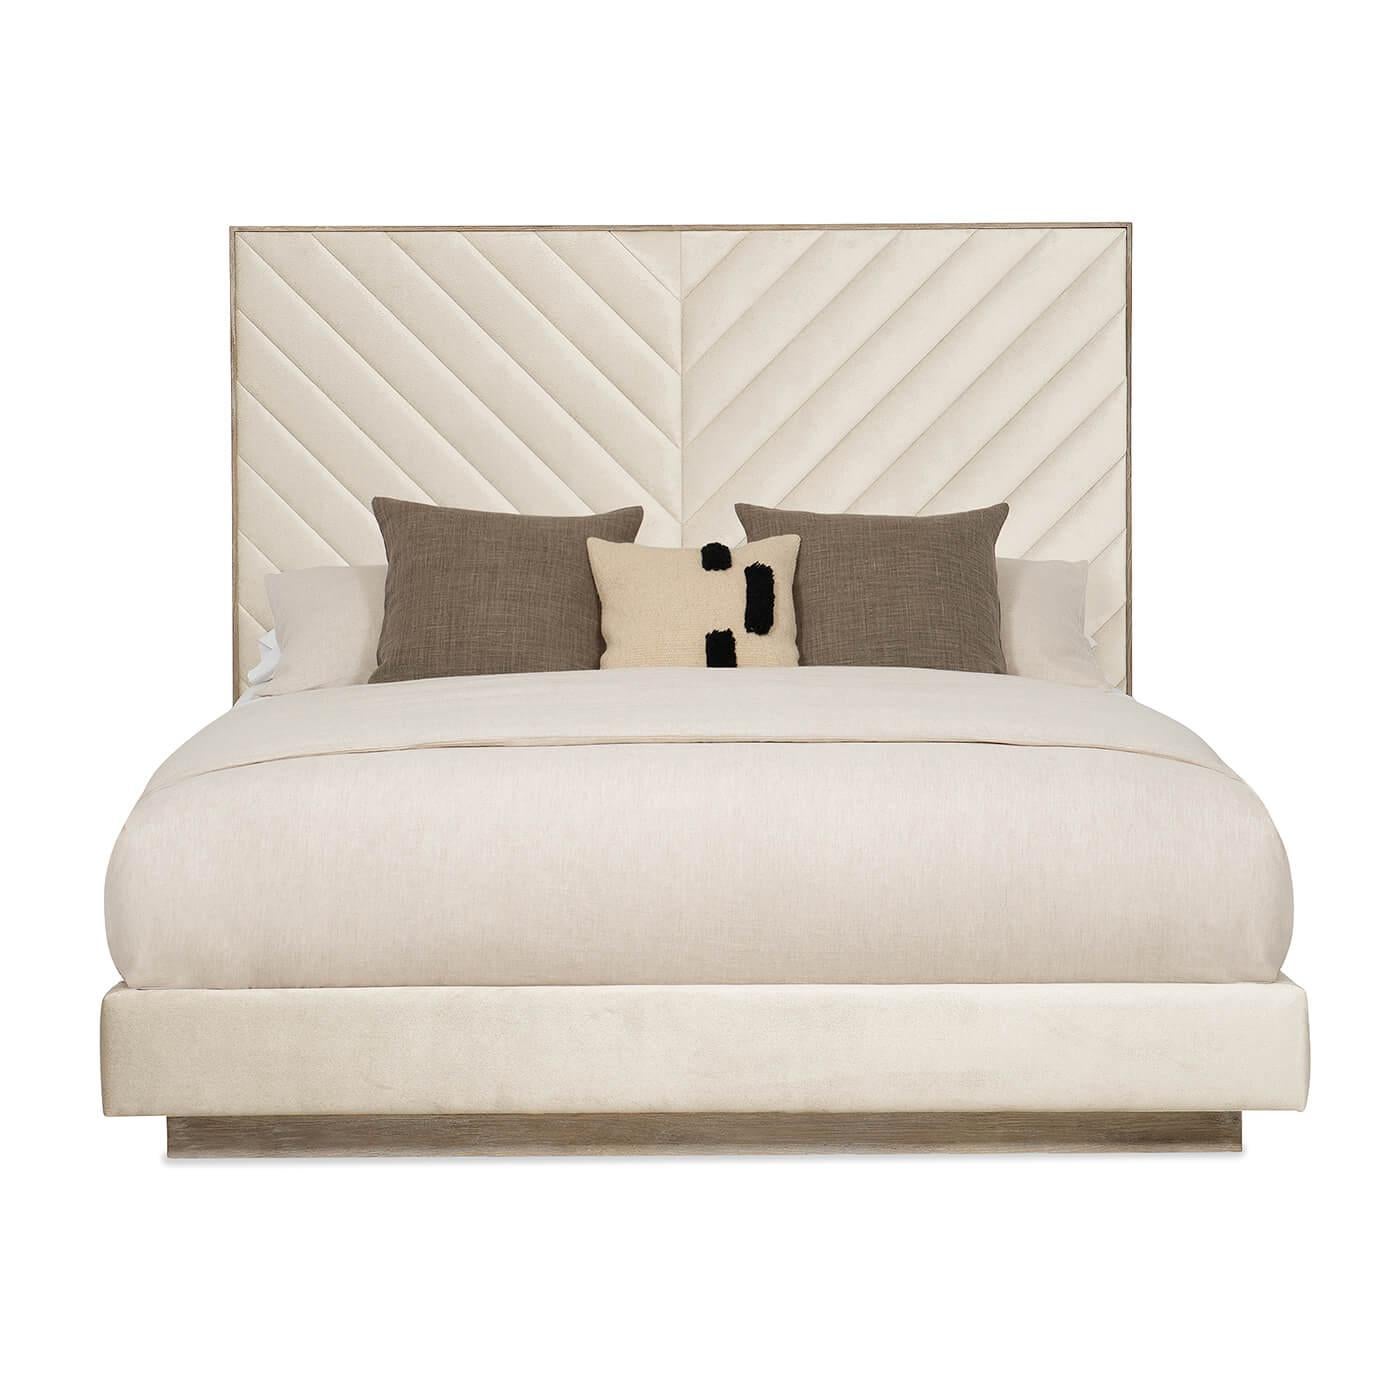 A Chevron tufted upholstered king bed with an Ash Driftwood finish frame. It has a tall upholstered headboard with a modern channel tufting design of converging angles that meet in the center to create a mesmerizing chevron. This bed’s fully